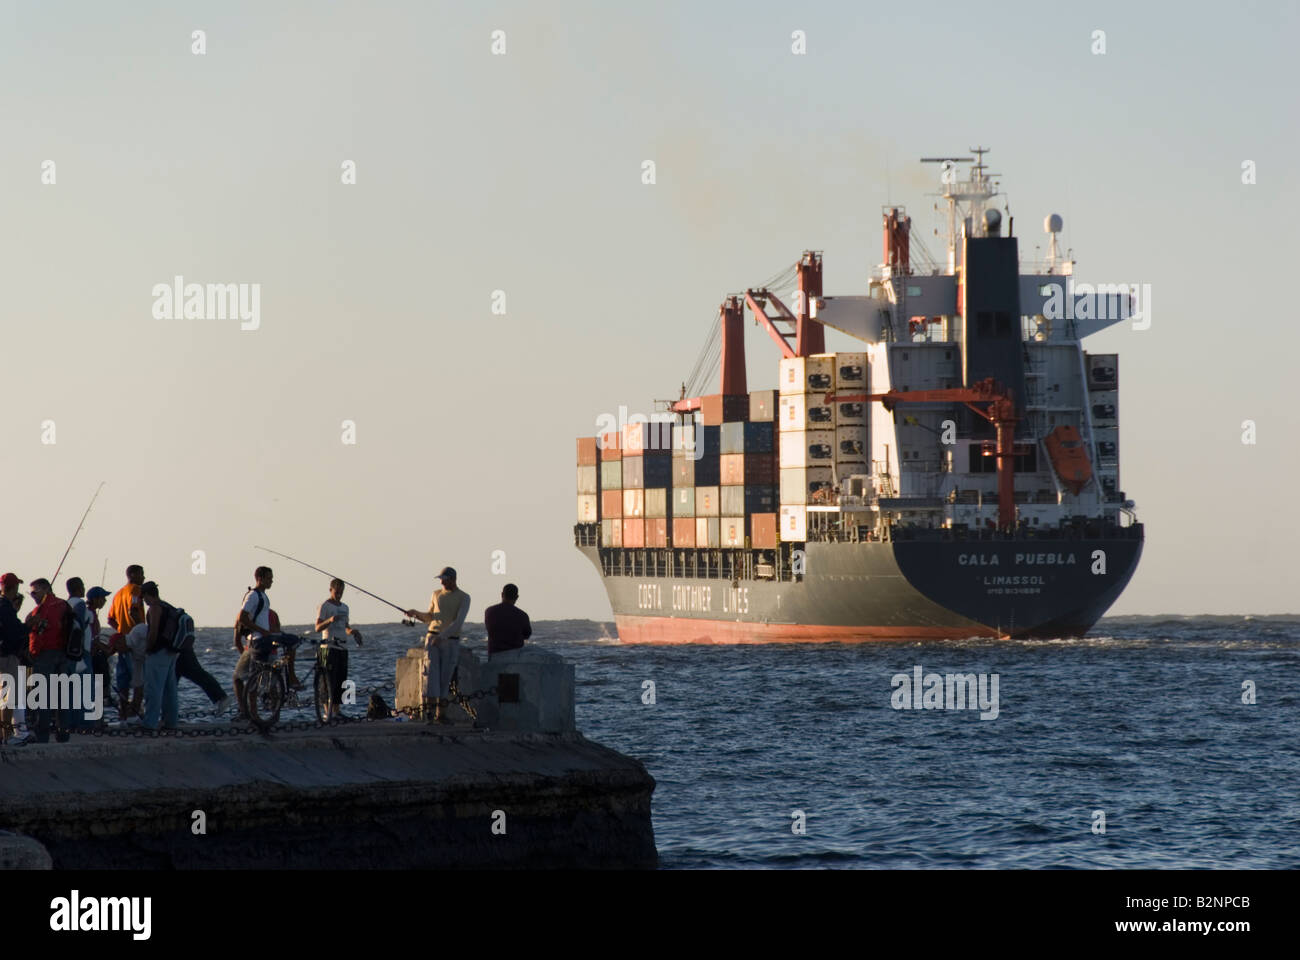 CARGO SHIP LEAVING THE PORT OF HAVANA CUBA DURING THE PERIOD OF TRADE EMBARGO Stock Photo